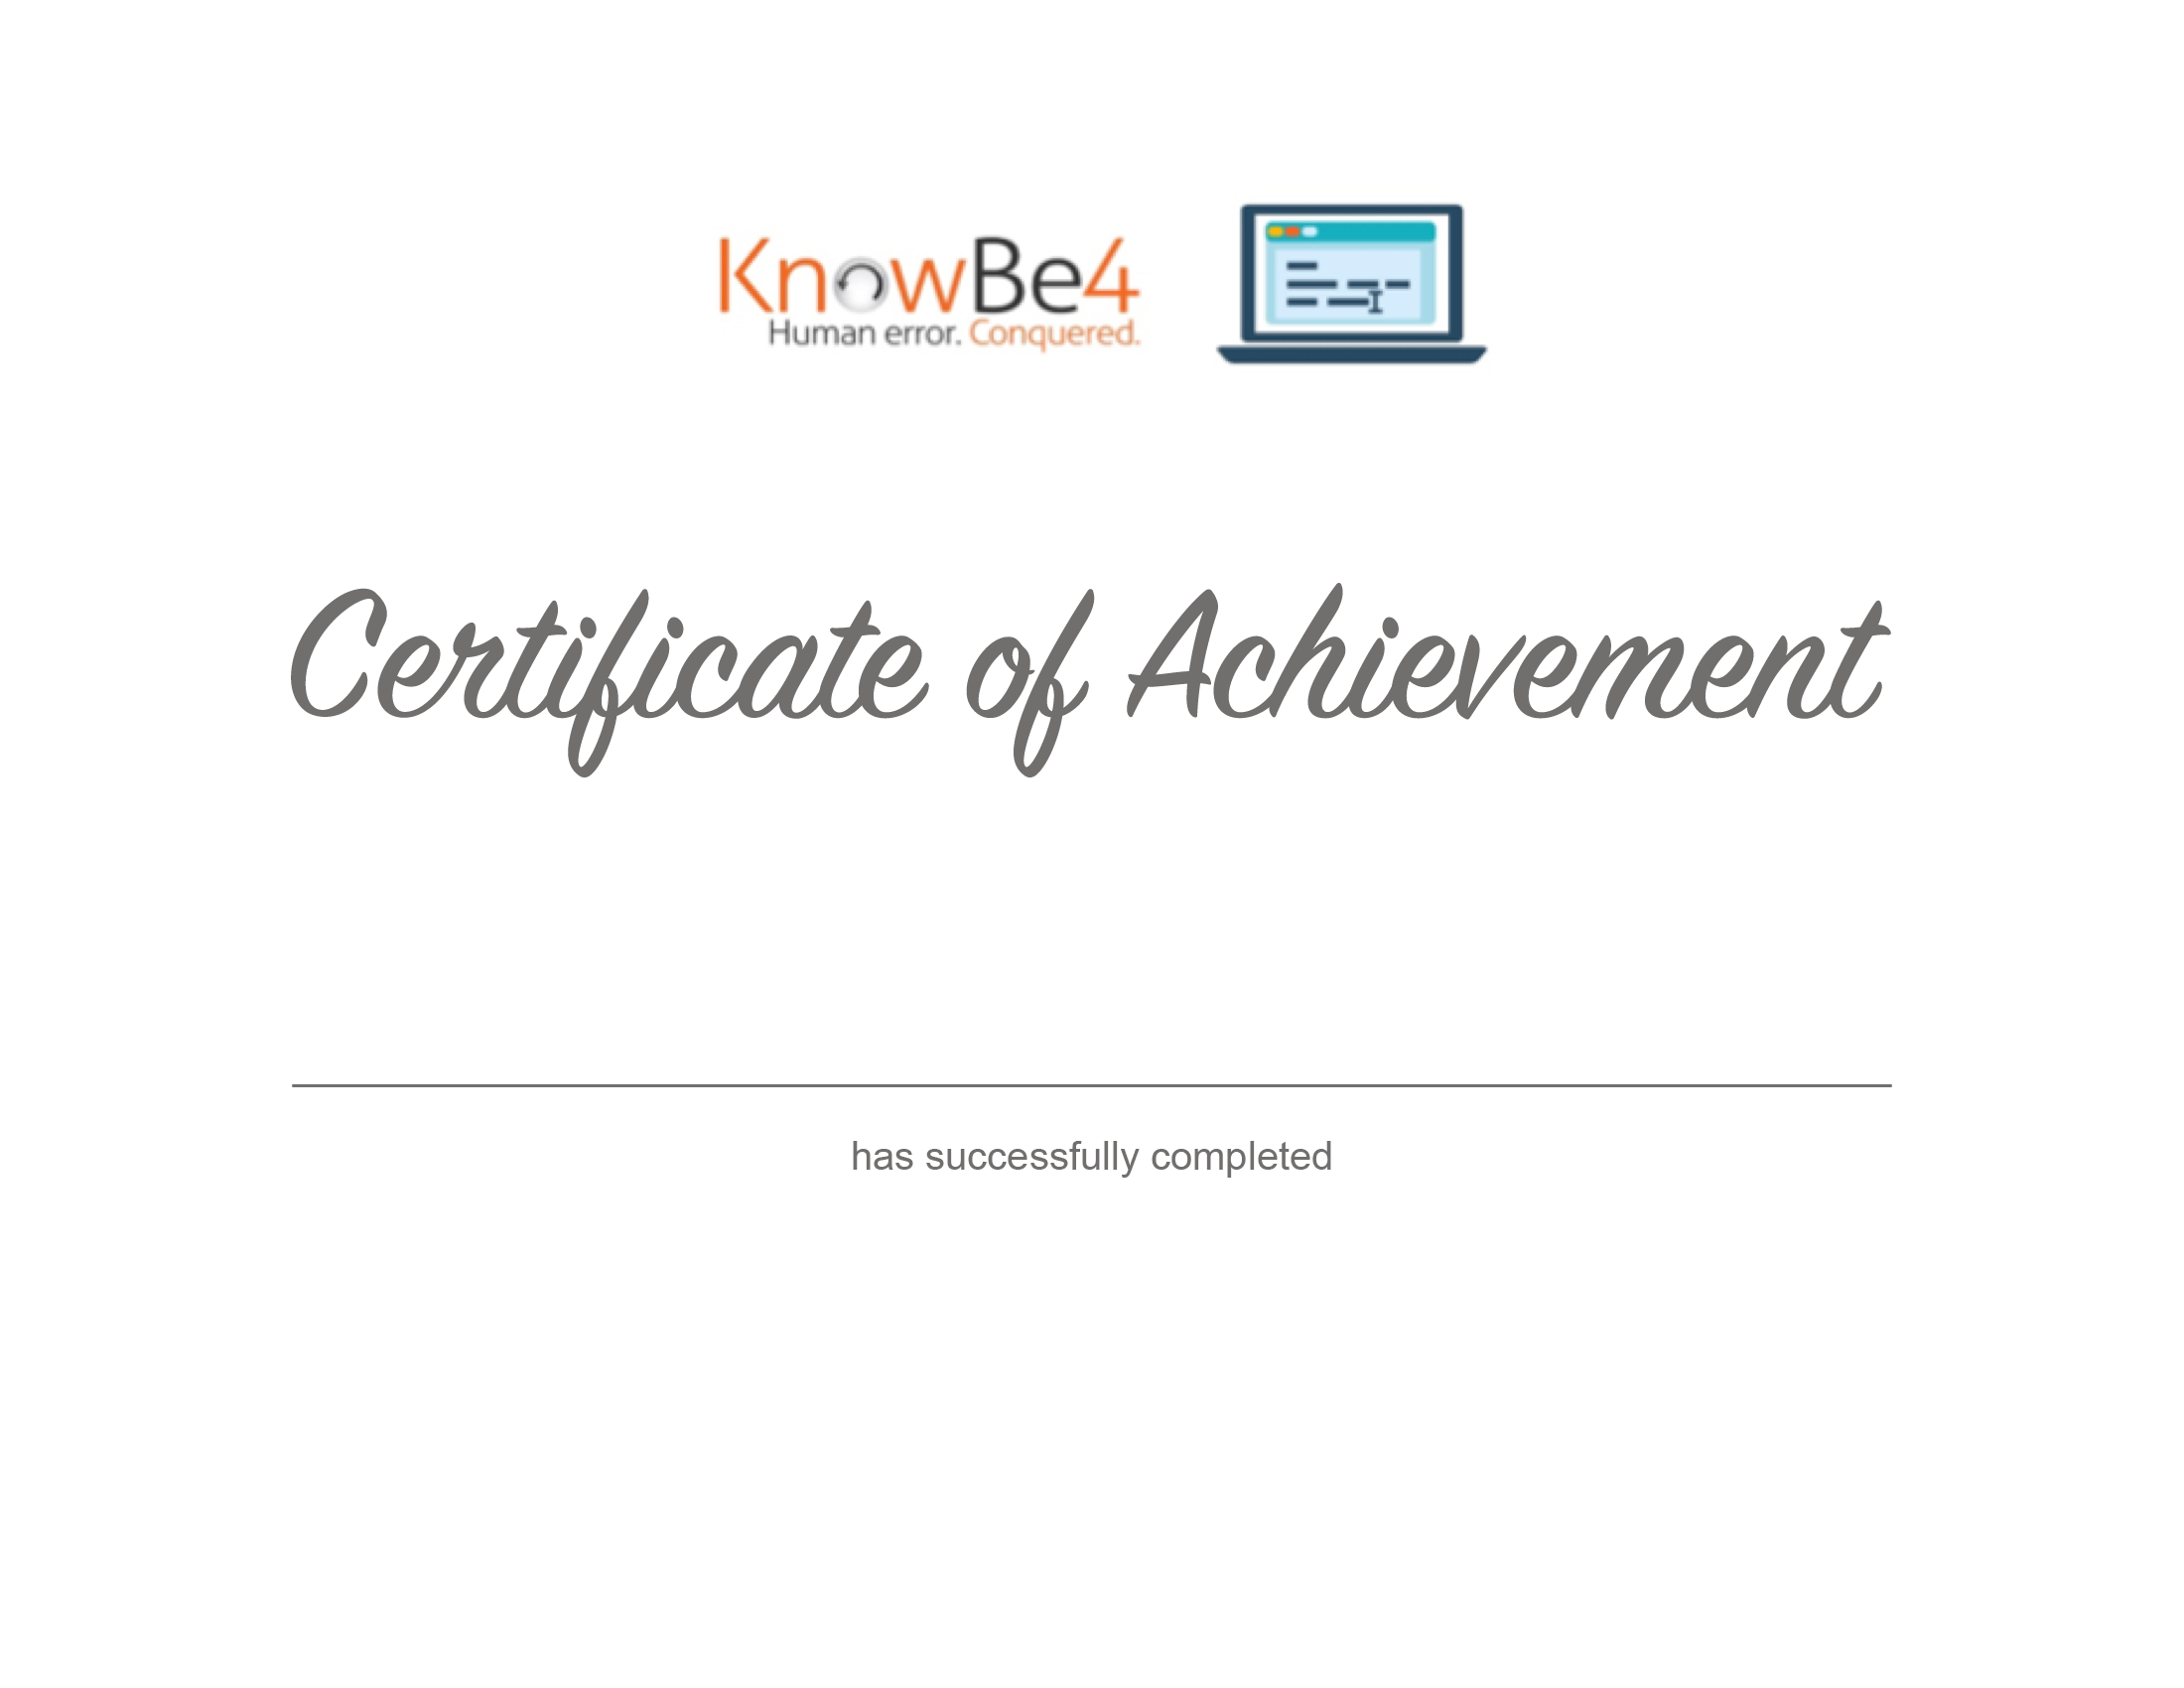 How Do I Customize My Users' Training Certificates With Regard To No Certificate Templates Could Be Found